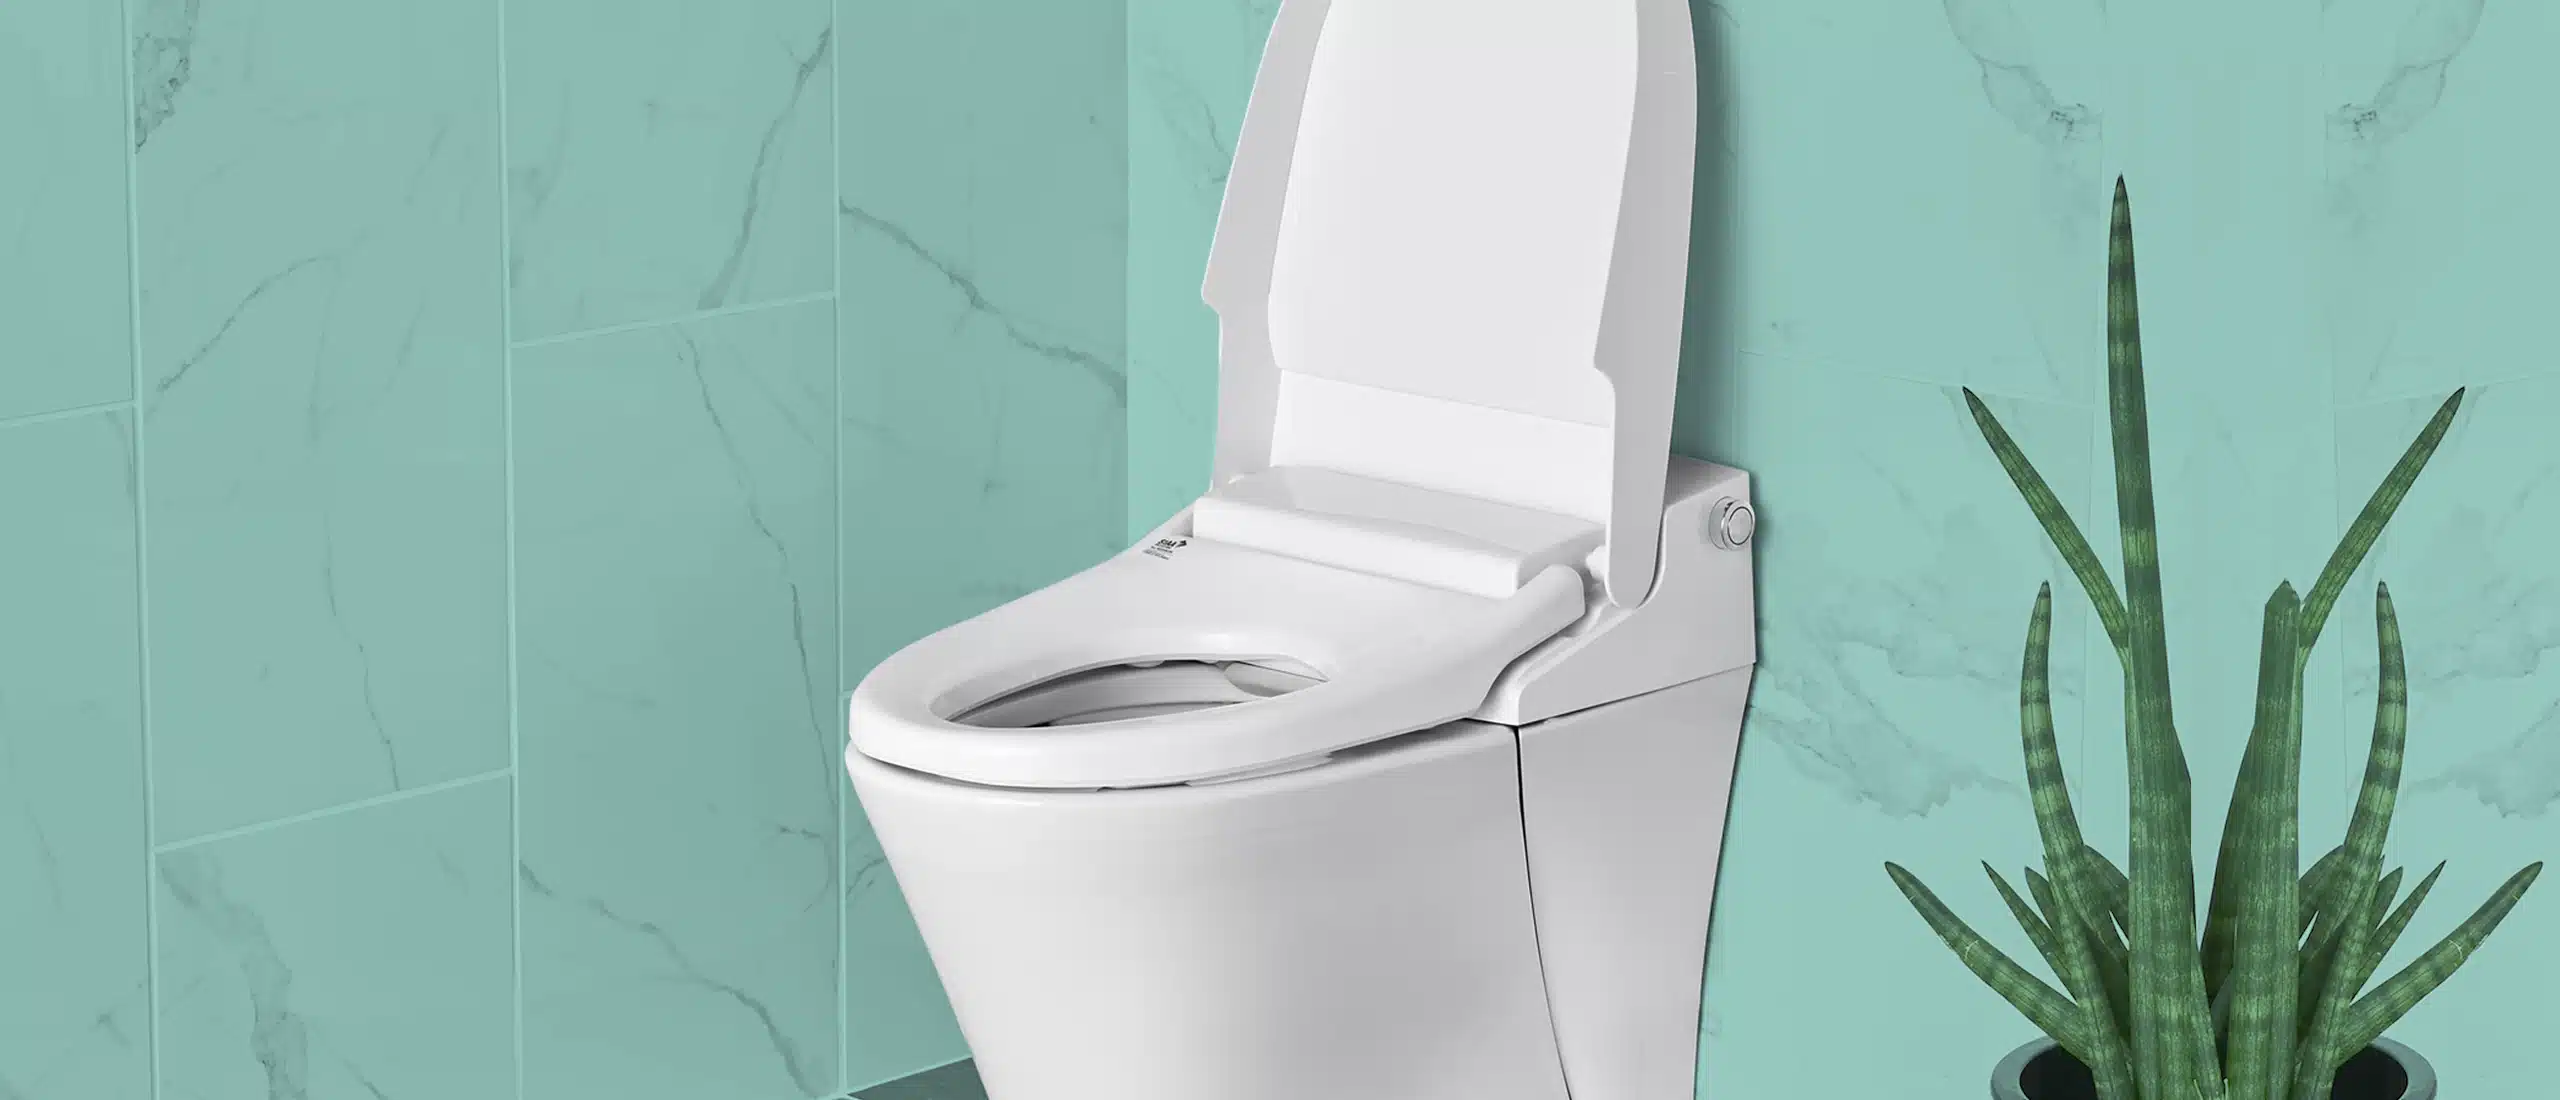 Smart toilet with green background